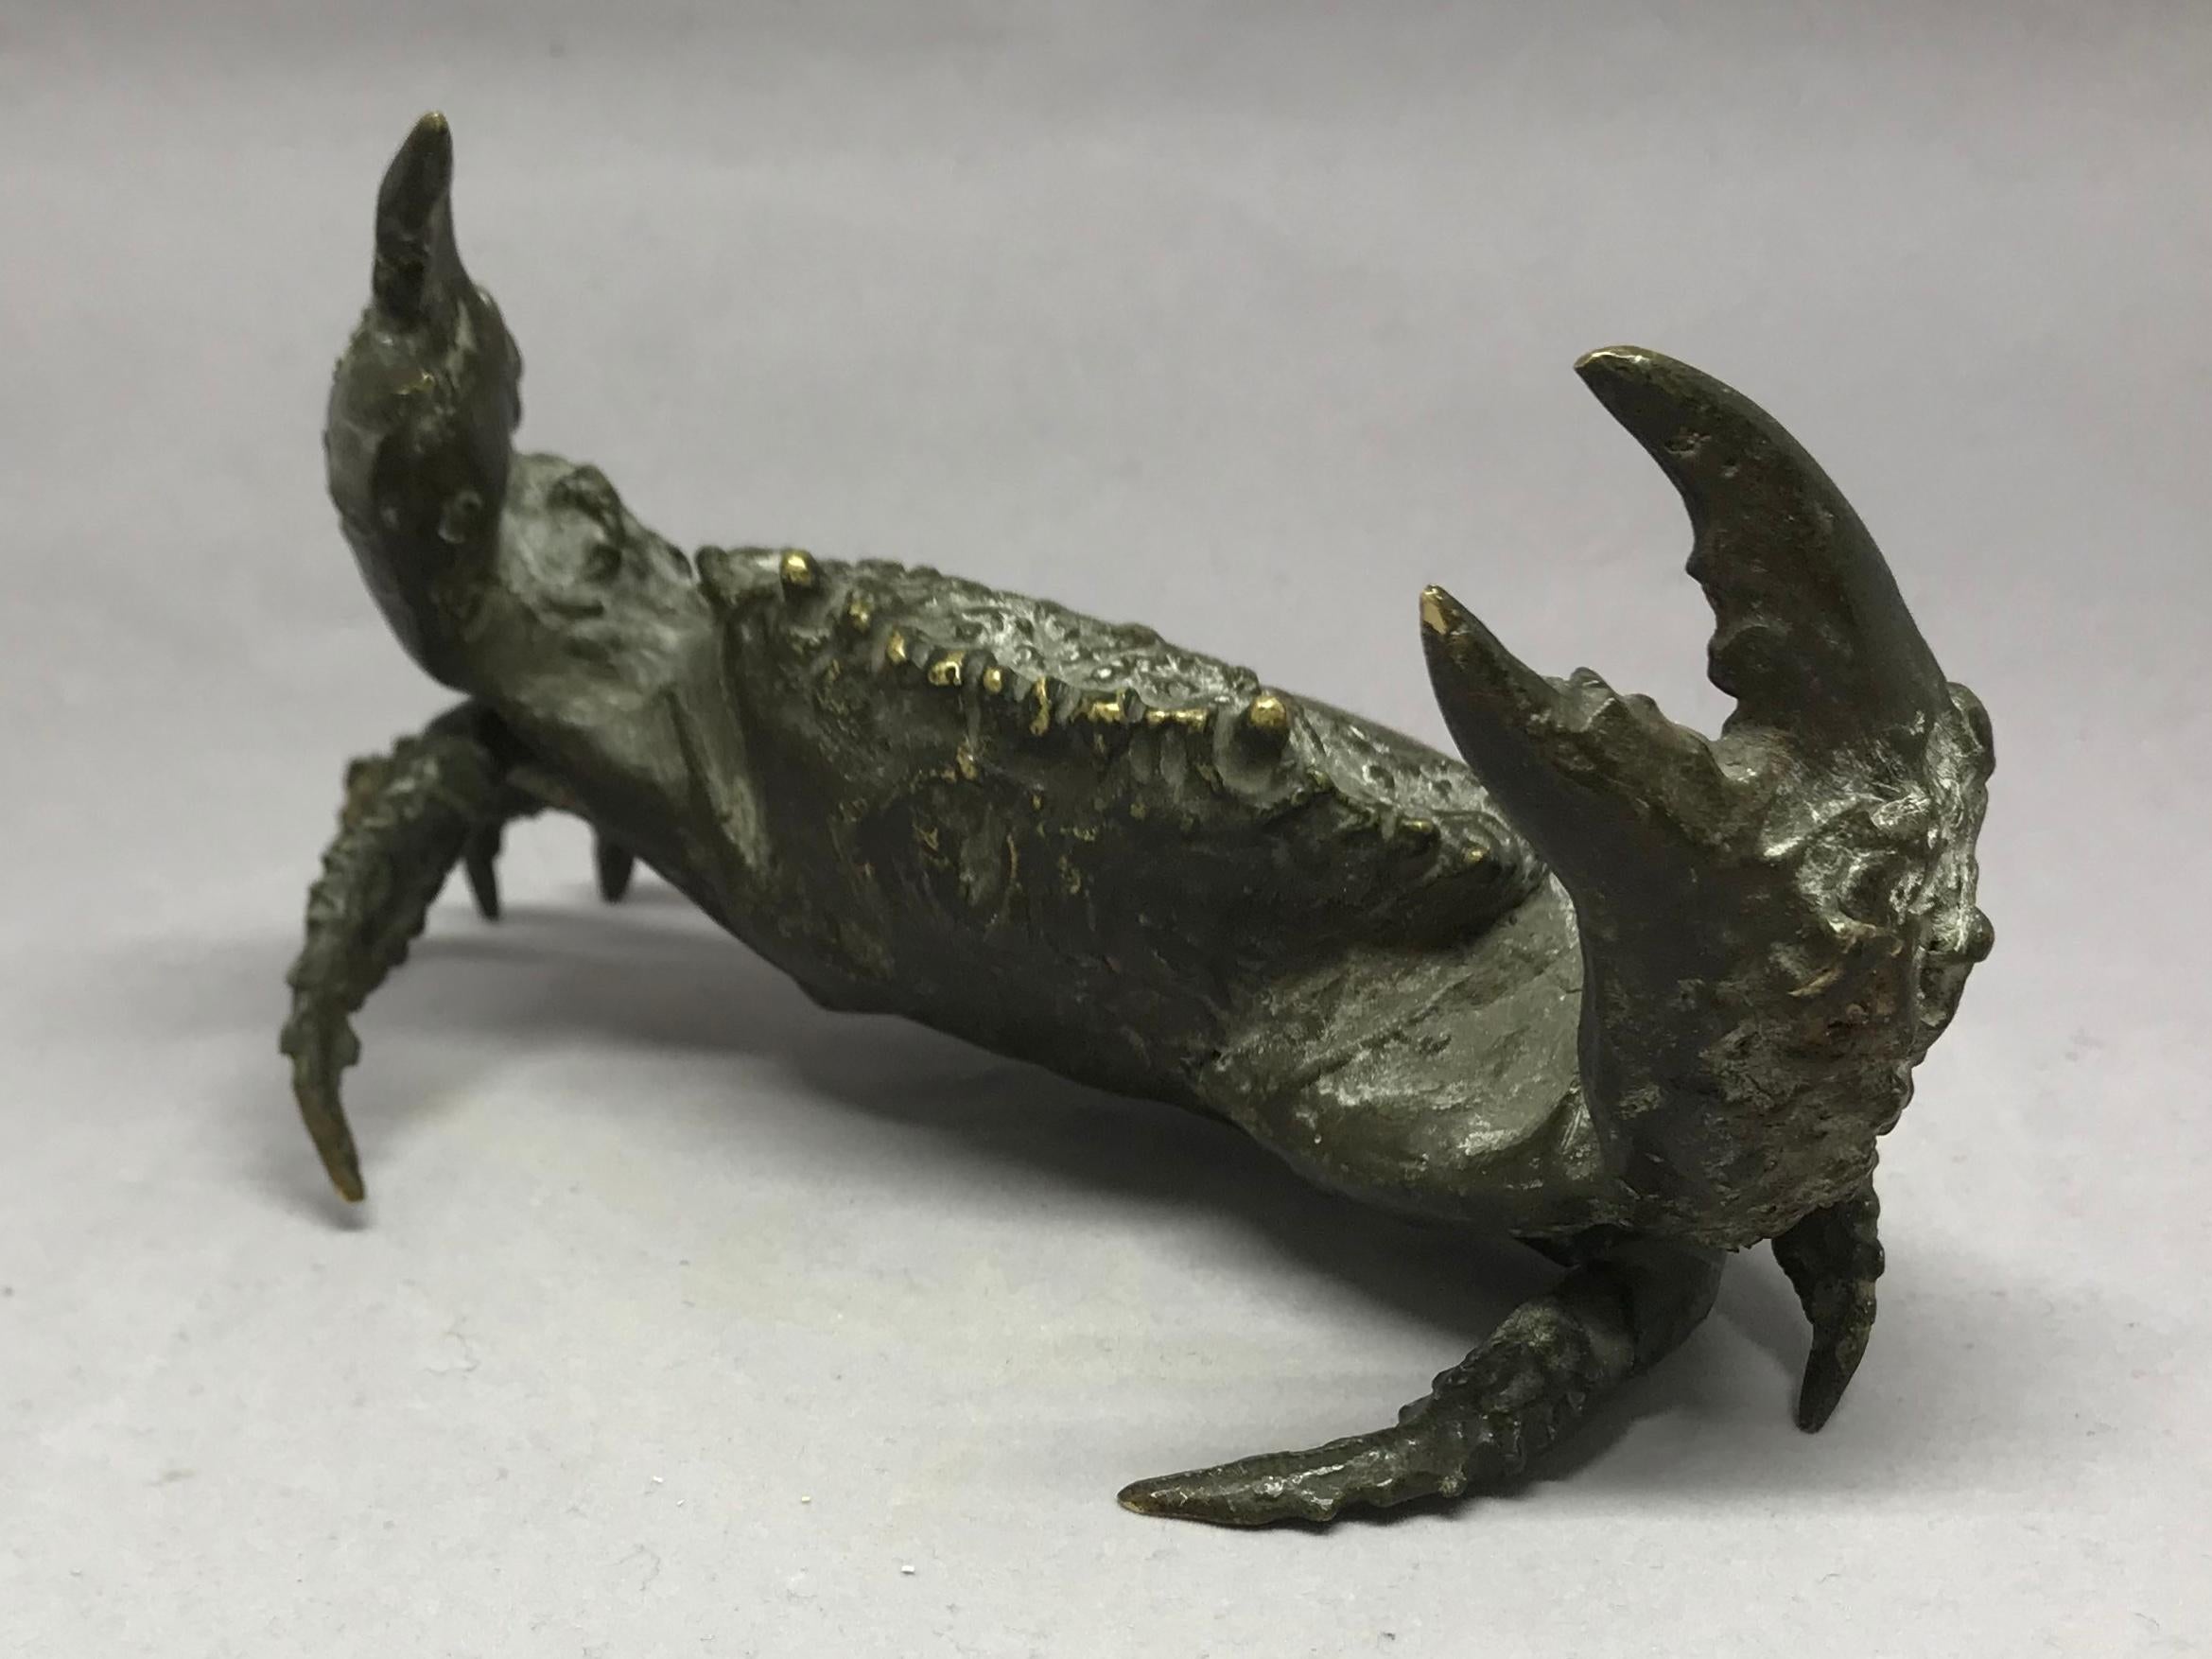 Italian lifesize bronze crab. Late 19th century life-like Neapolitan crab with rich bronze patina, Italy, circa 1890s.
Dimensions: 6.75